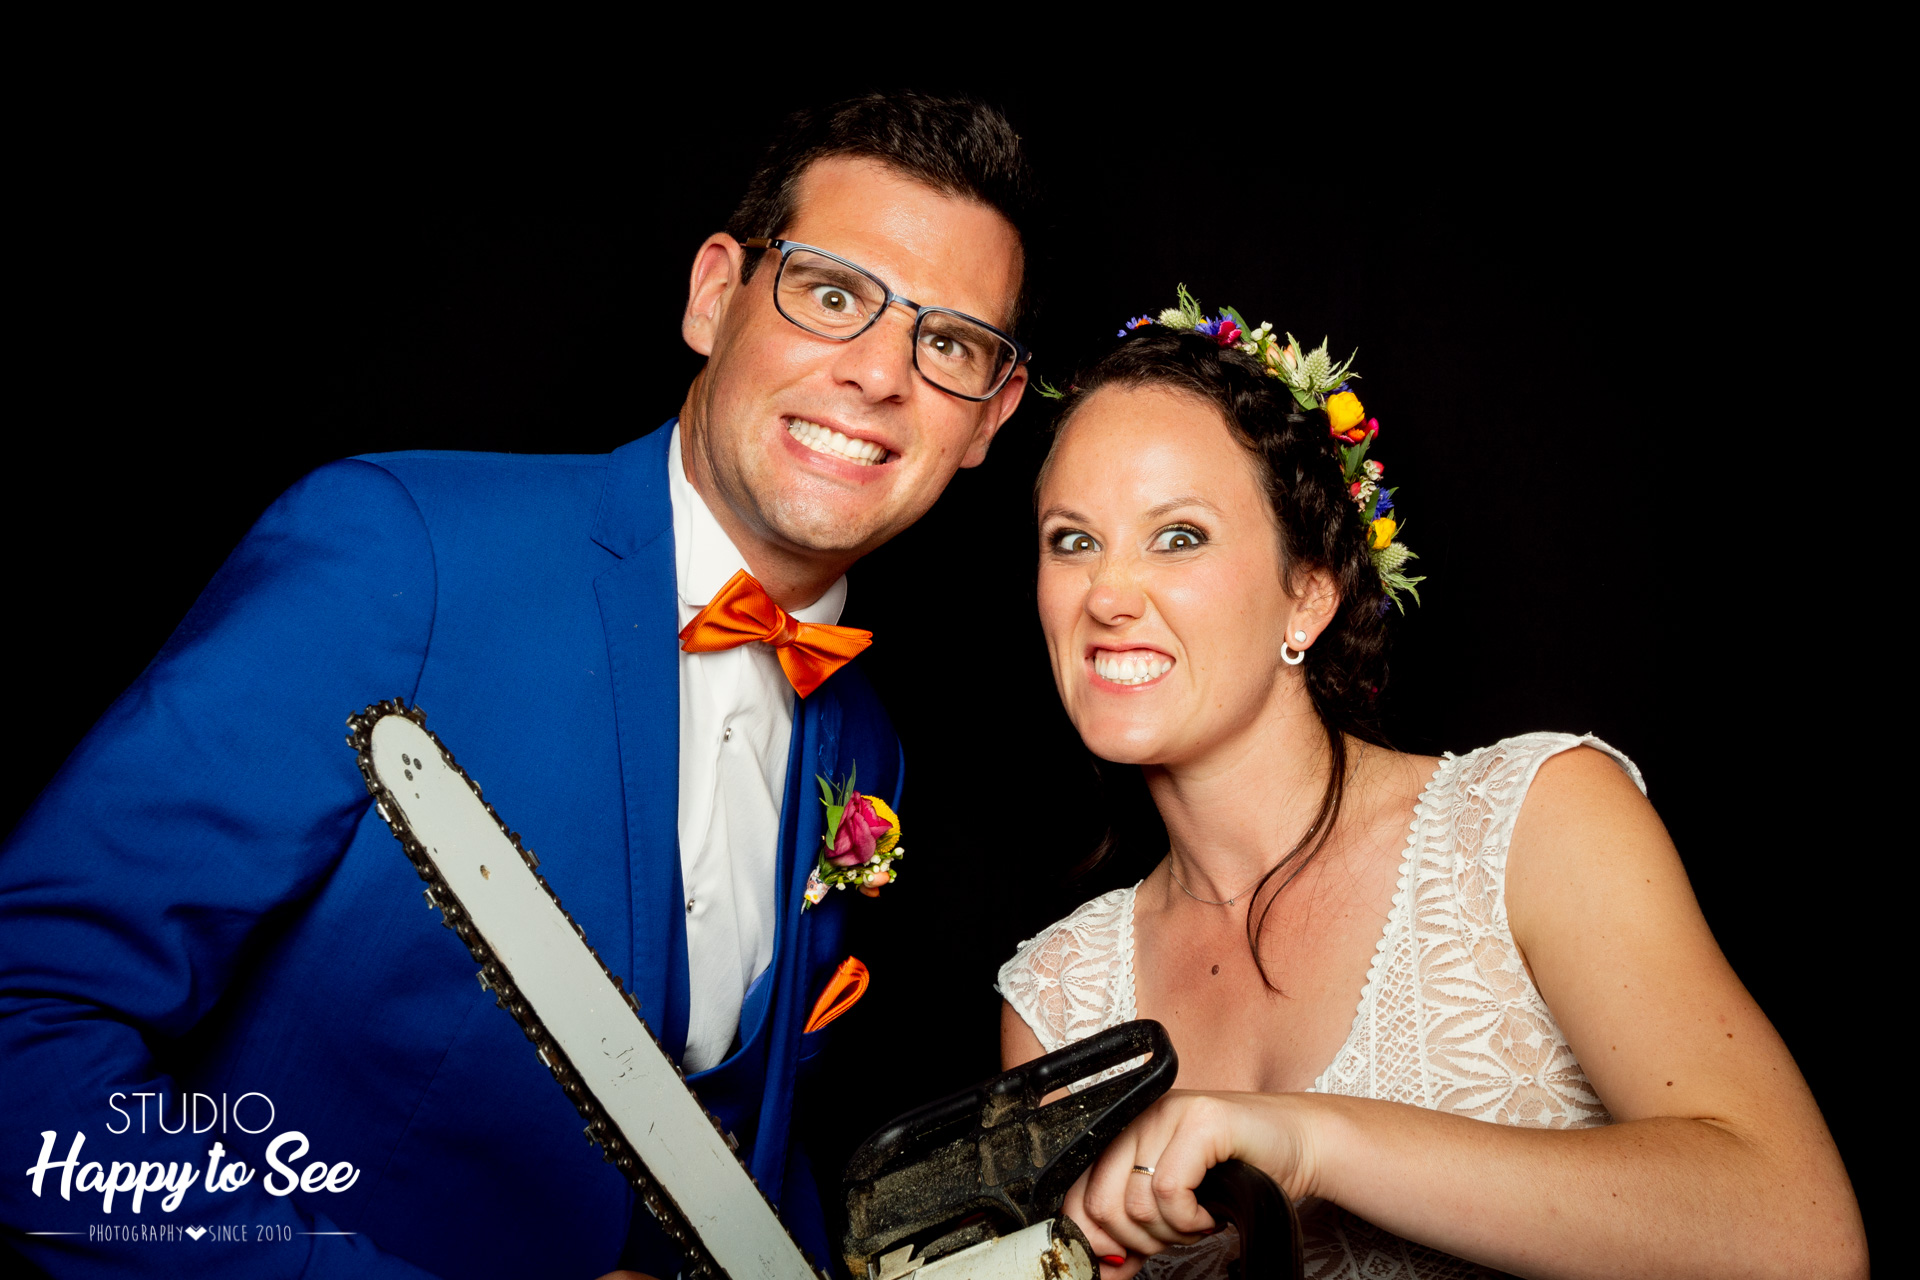 Studio Mobile Happy to See animation photobooth mariage